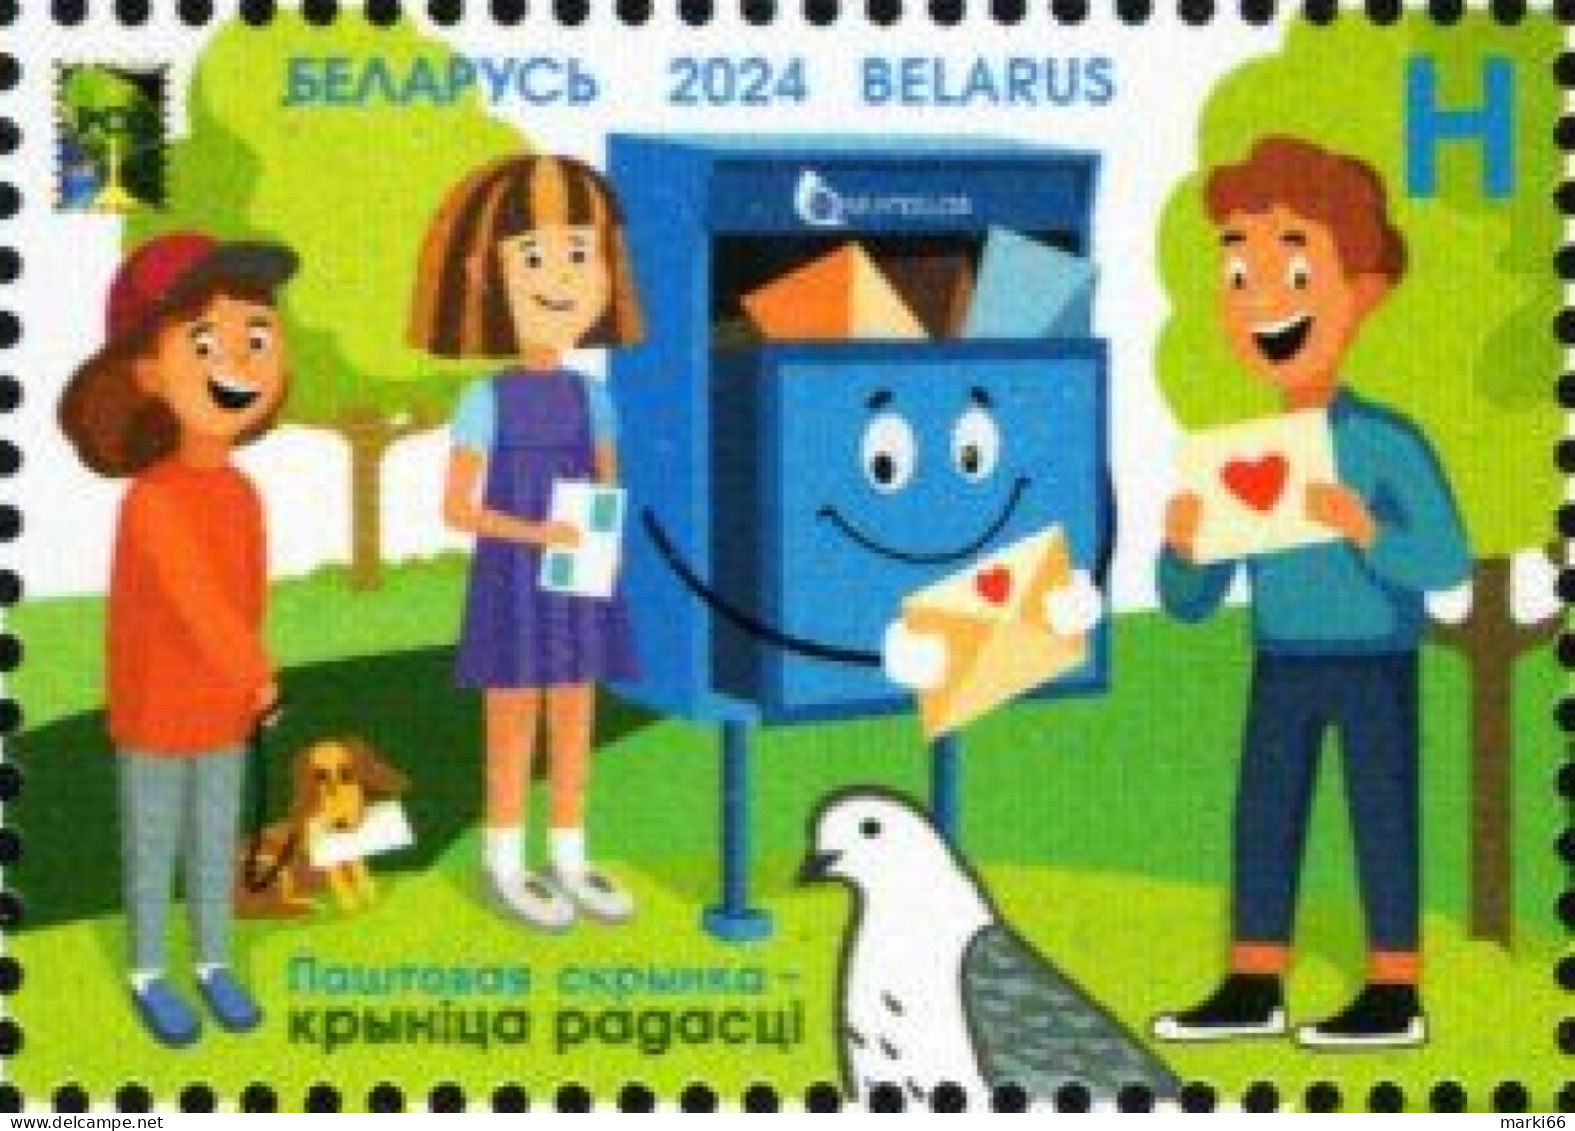 Belarus - 2024 - Postboxes - RCC Common Issue - Mint Stamp - Bielorrusia